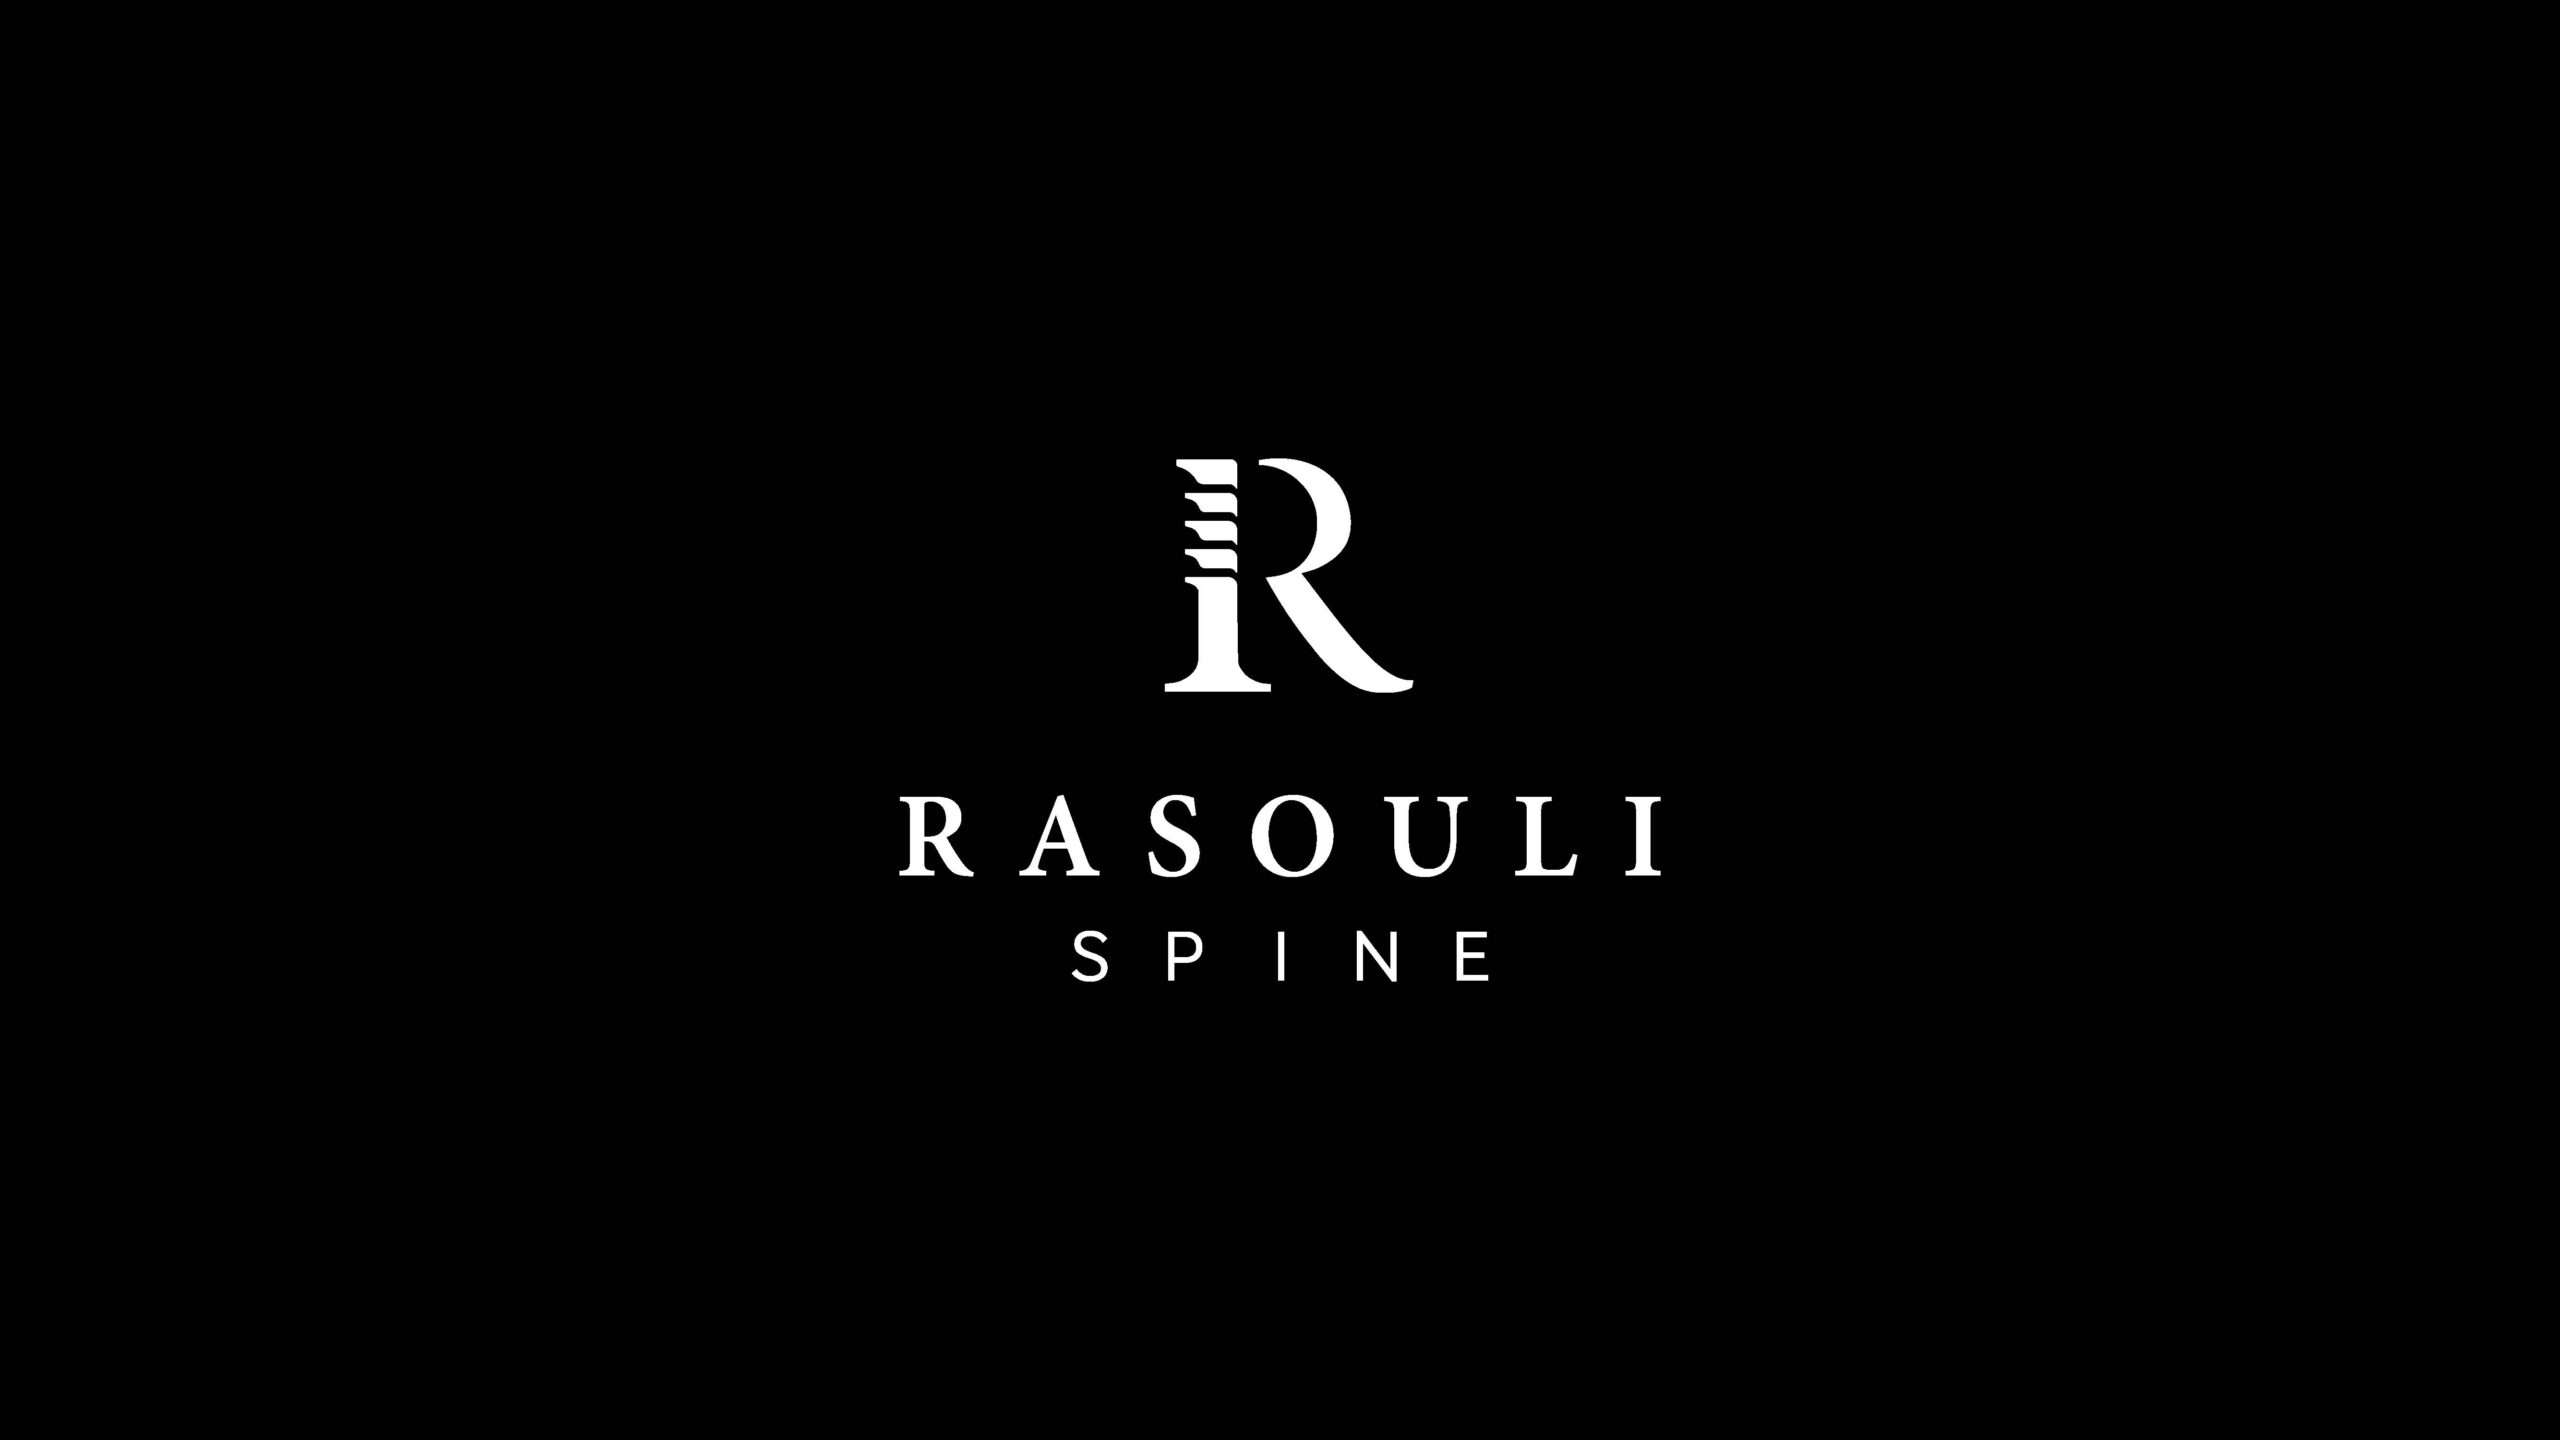 RasouliSpine Announces Collaboration with The View Hospital in Doha